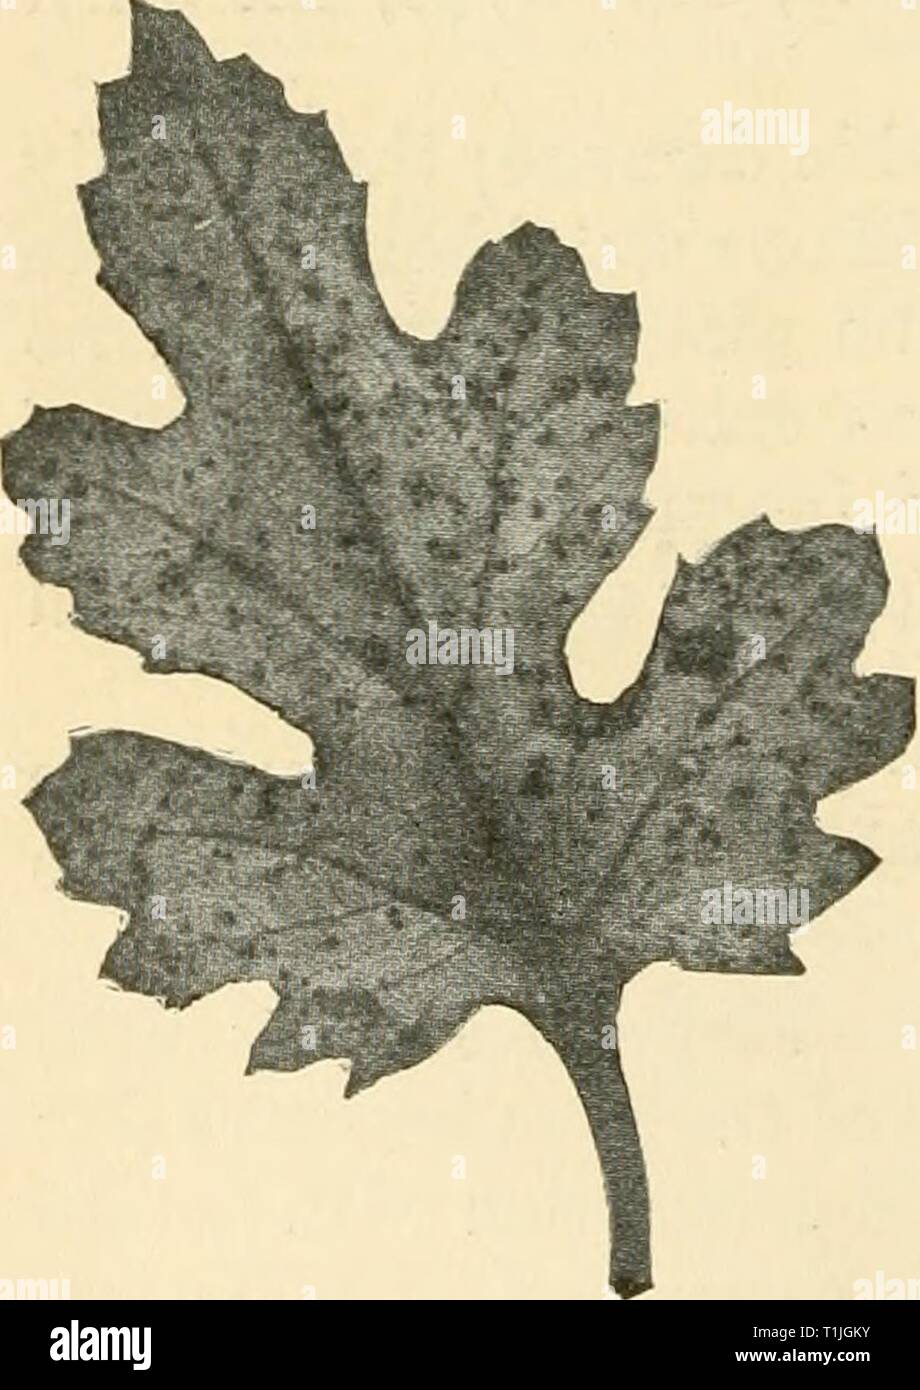 Diseases of economic plants (1921) Diseases of economic plants  diseasesofecon00stev Year: 1921  418 Diseases of Economic Plants CHRYSANTHEMUM Leaf-spot ••'' {Septoria chrysanthemella Cav.). — Large brown to black blotches, often irregularly circular and of indefinite border, appear upon the leaves. These enlarge and coalesce to involve the whole leaf, which withers, dies, and falls away. The lower leaves are first affected, but in later stages all the leaves of the plant may be badly spotted, and practically complete defoliation may result. Cuttings from infected stock should be avoided. All  Stock Photo